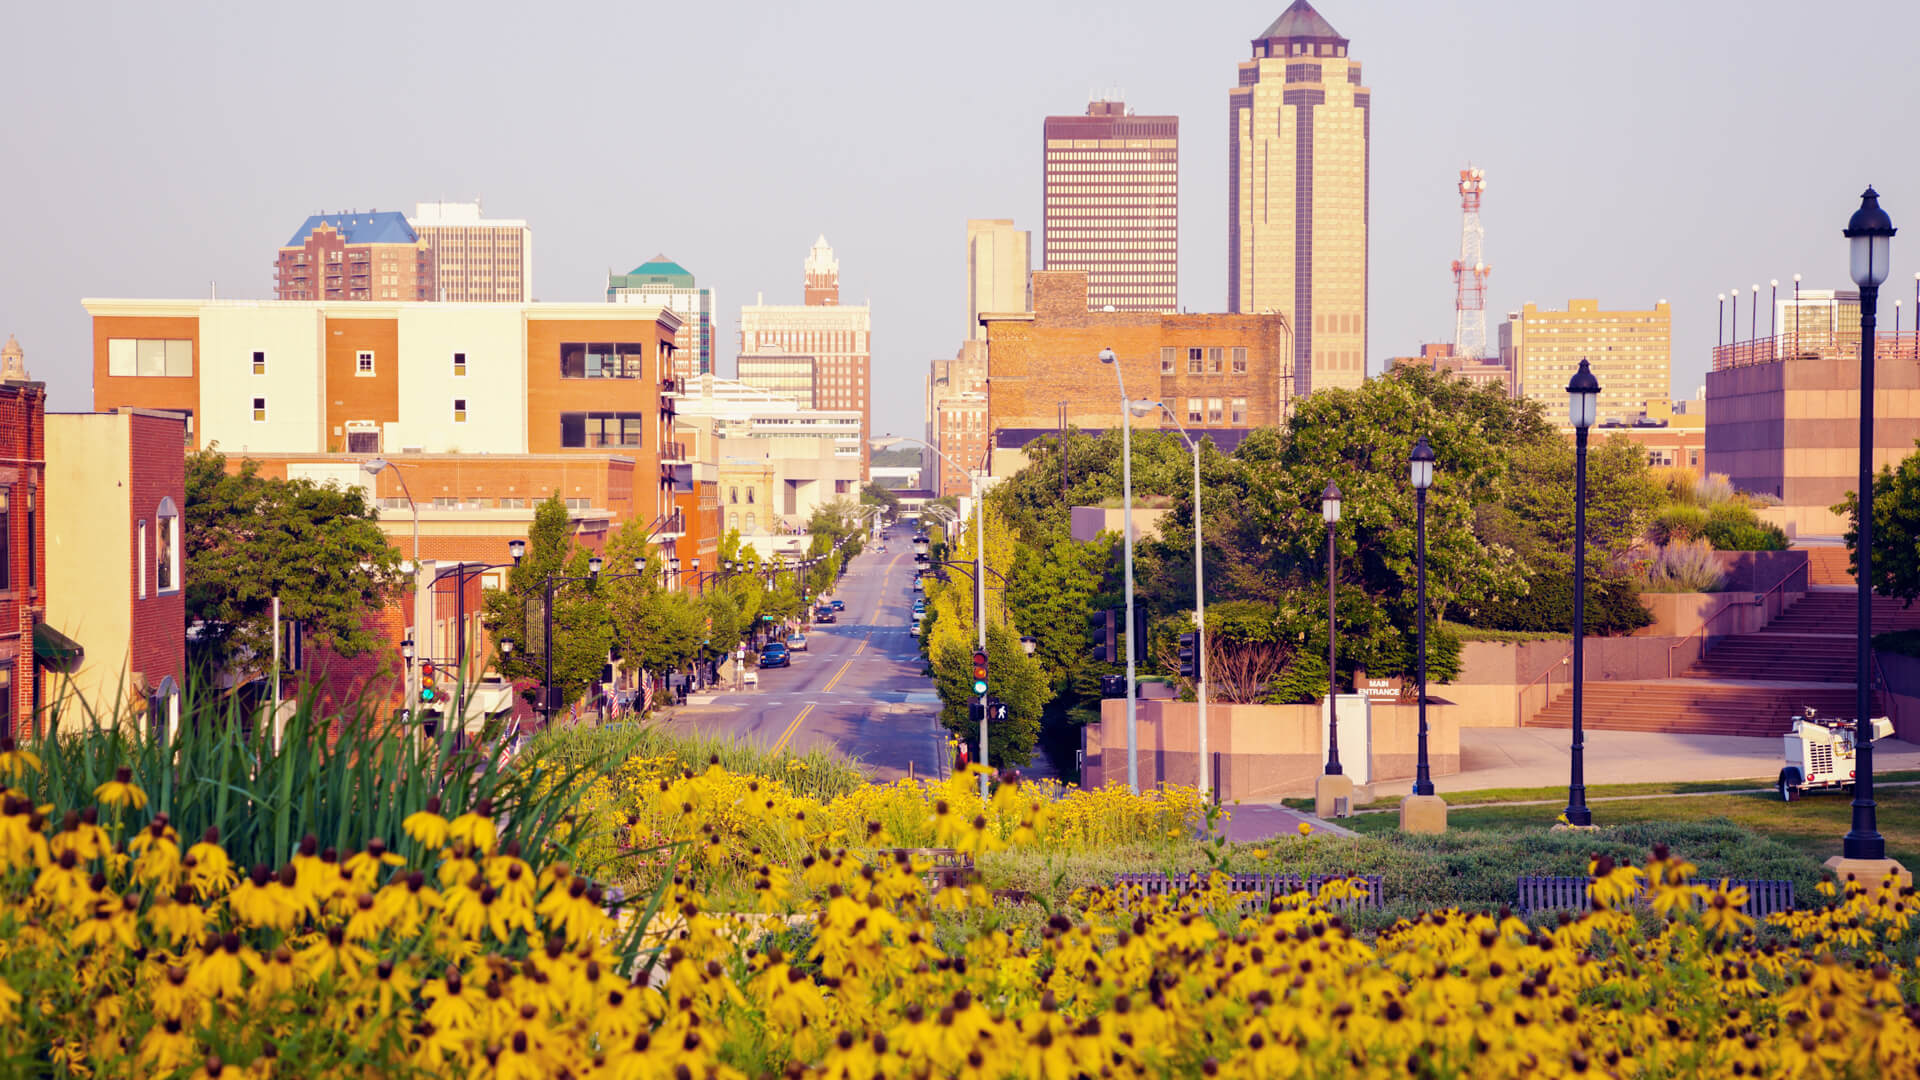 5 Best Midwest Cities To Buy Property in the Next 5 Years, According to Real Estate Agents